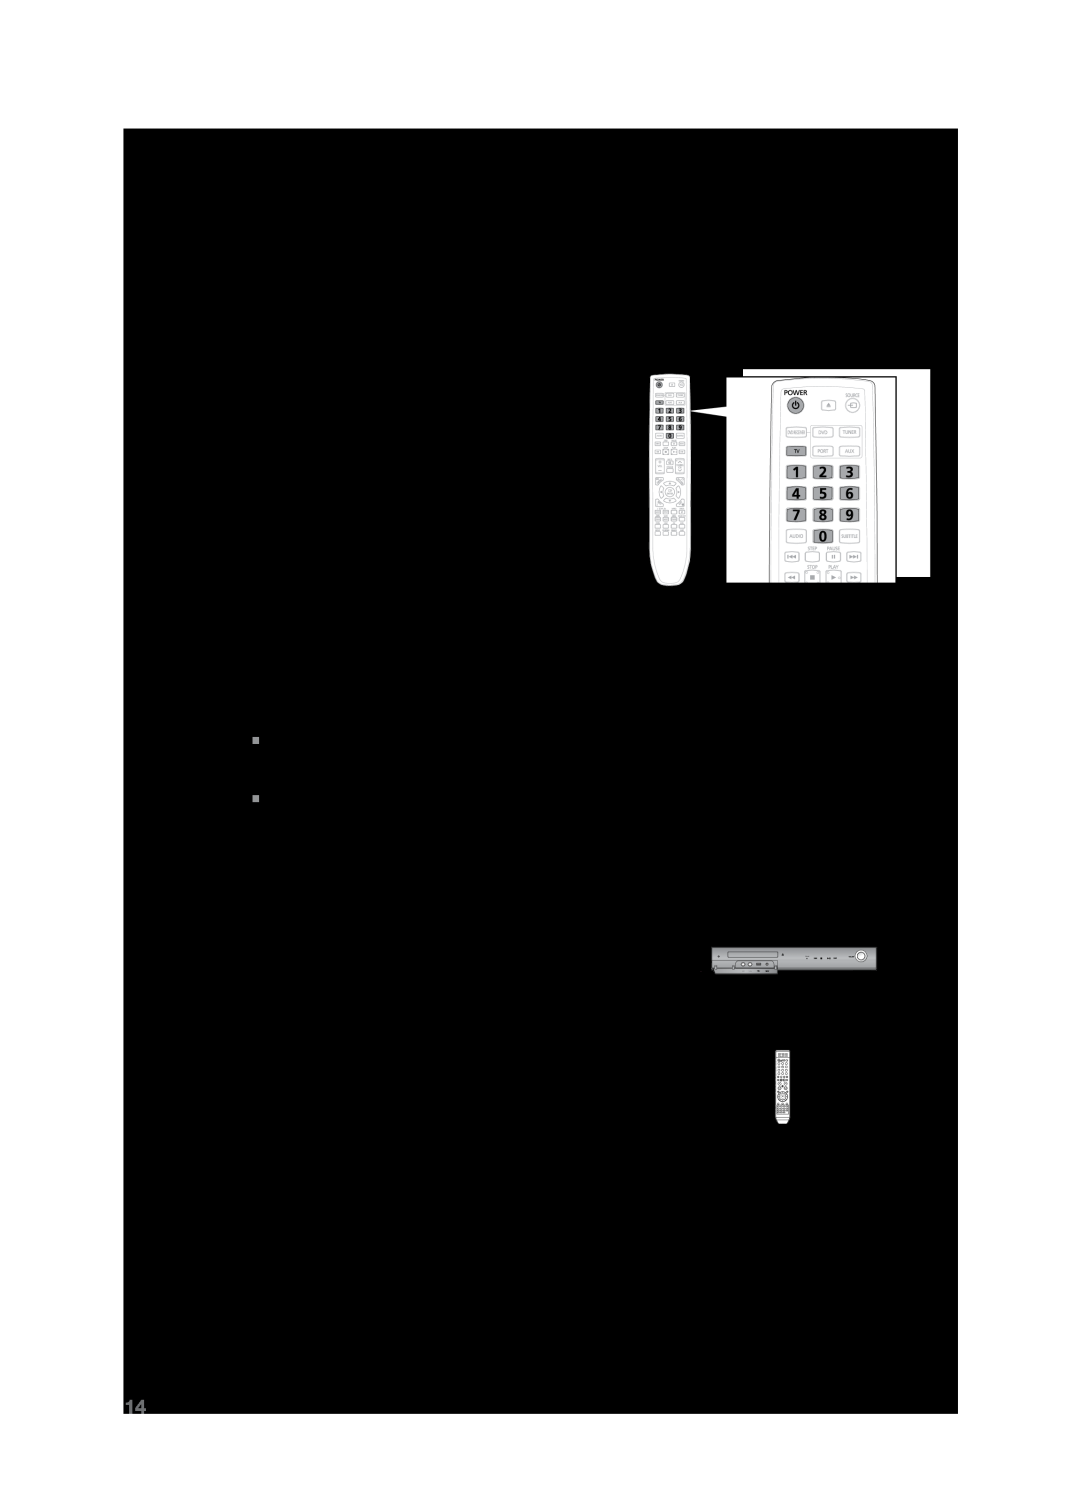 Samsung HT-TZ325T/SIM, HT-Z220T/MEA, HT-TZ325T/FMC Setting the Remote Control, When operating a TV with the remote control 